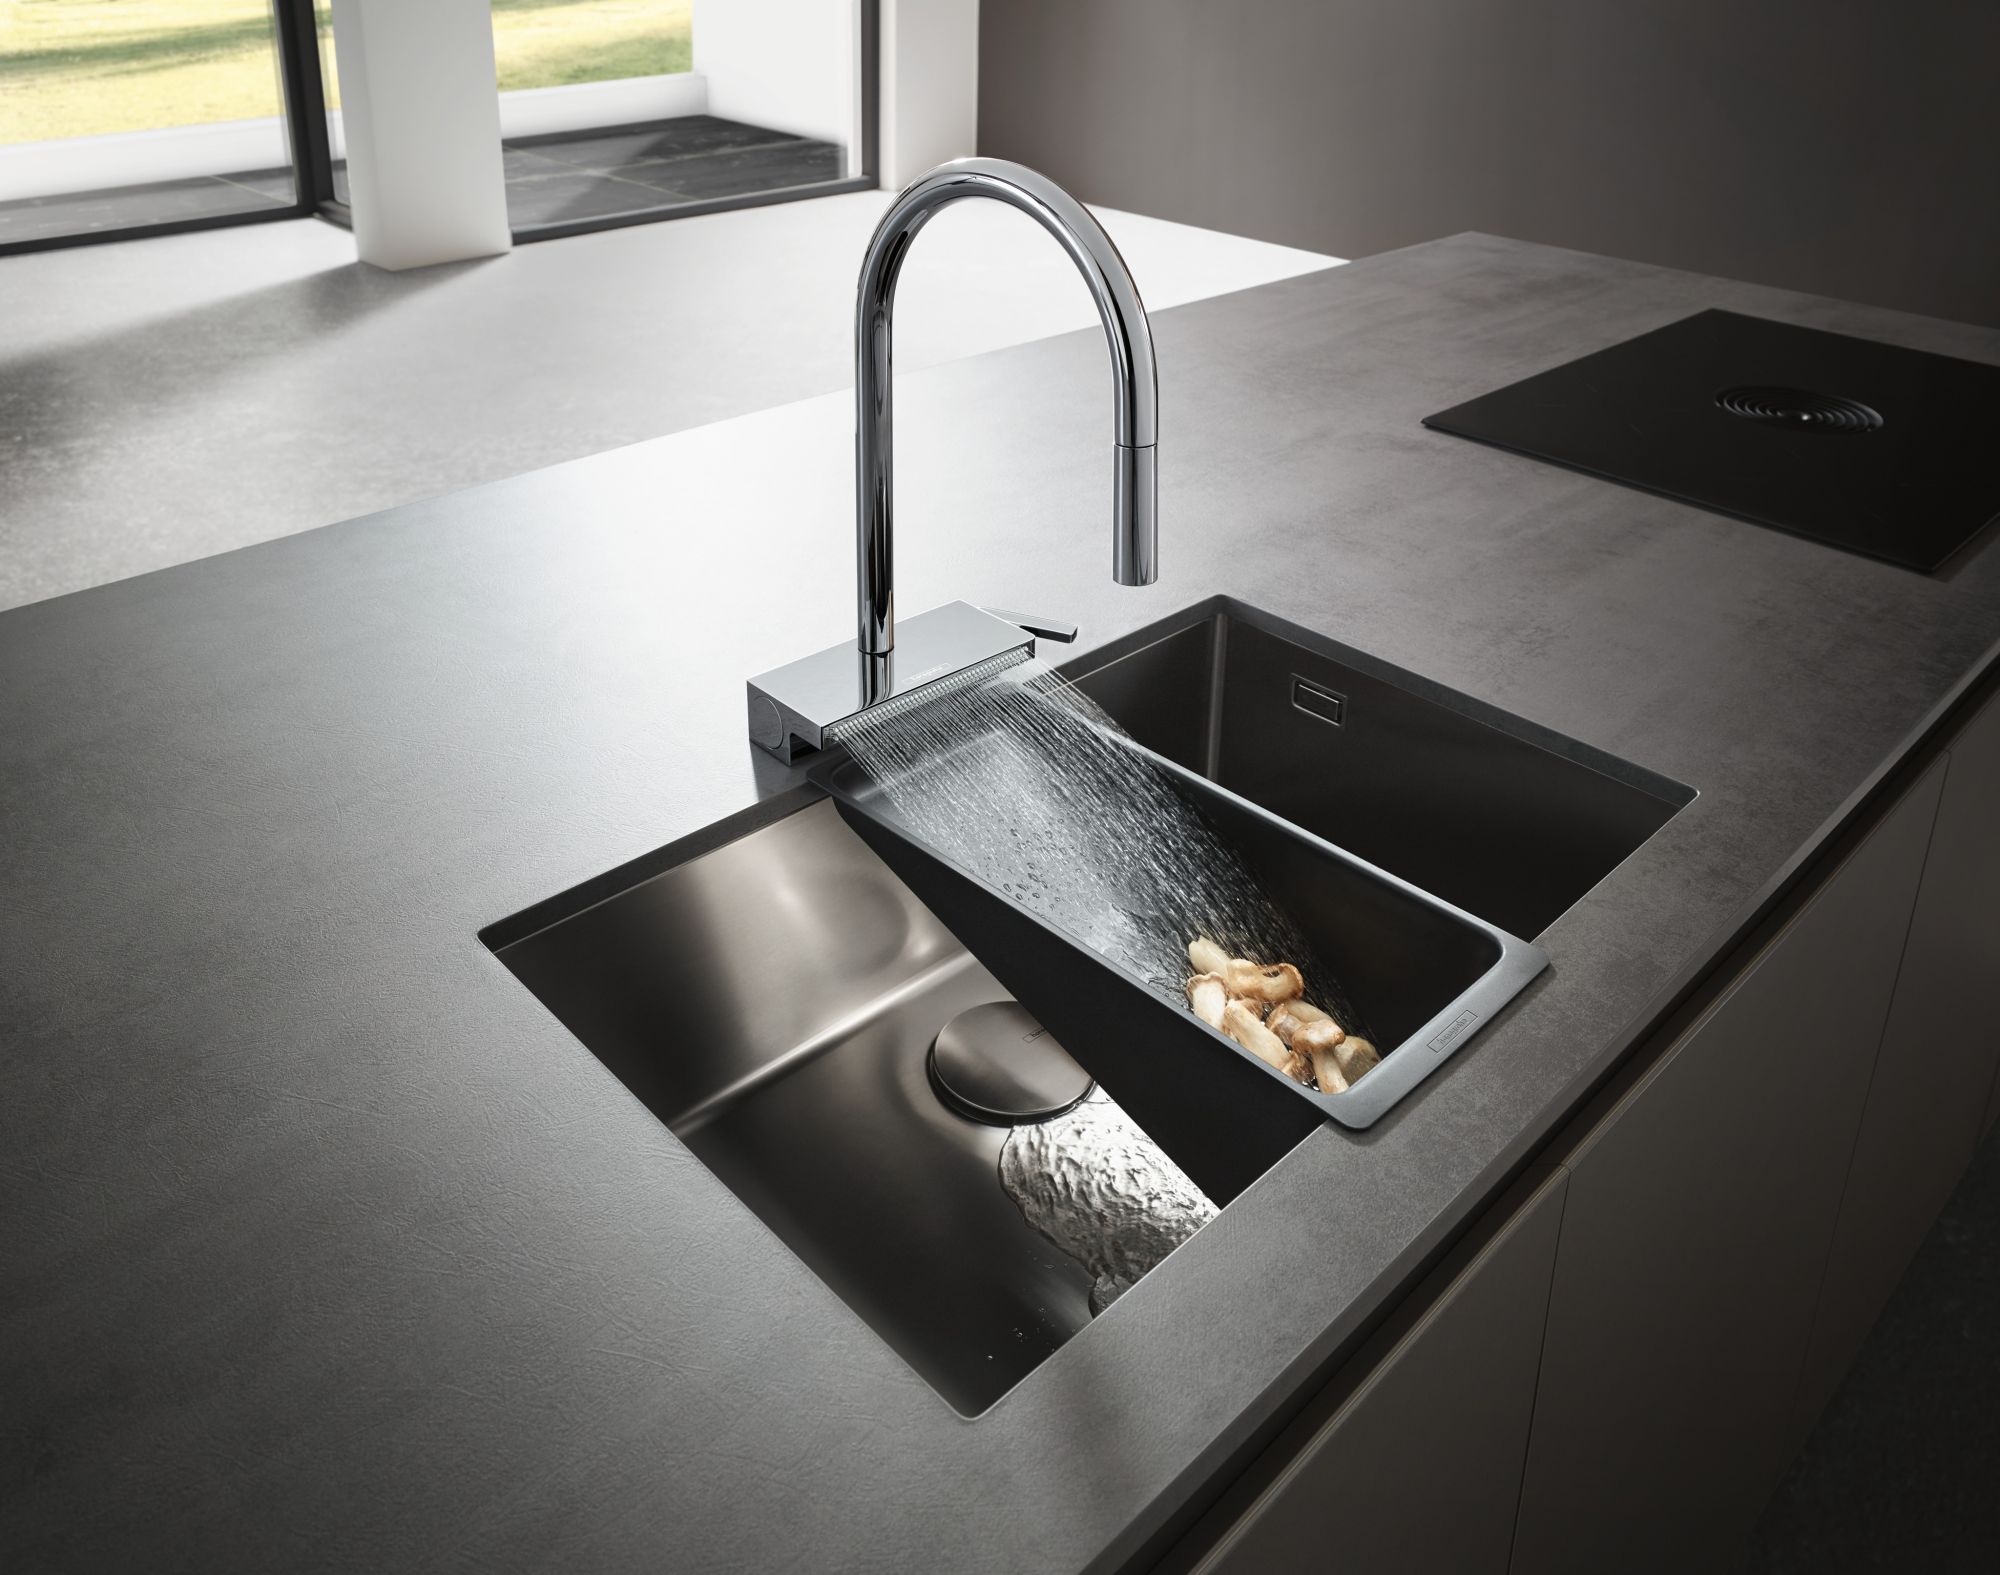 Kitchen Tips: The hansgrohe Aquno M81 Integrated System Will Help You Work More Efficiently